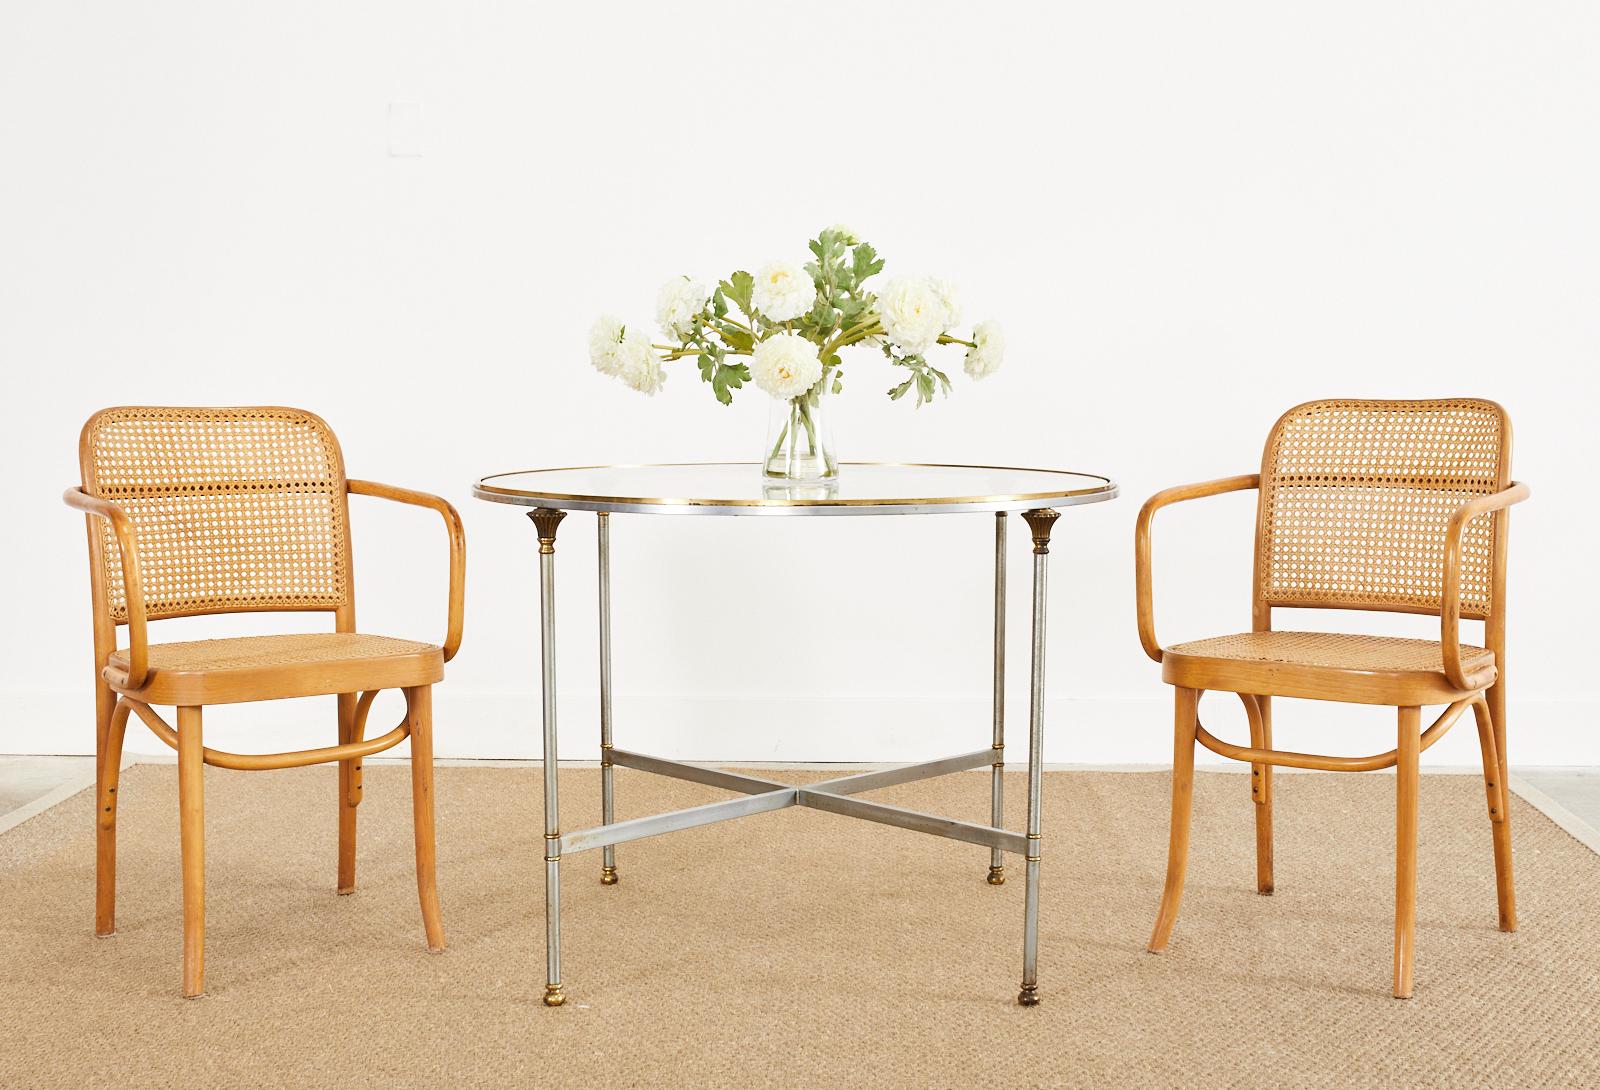 Opulent steel and bronze round center table or dining table made in the manner and style of Maison Jansen. The table features four column style legs with bronze fluted capitals. The legs are conjoined in the middle with cross stretchers and end with